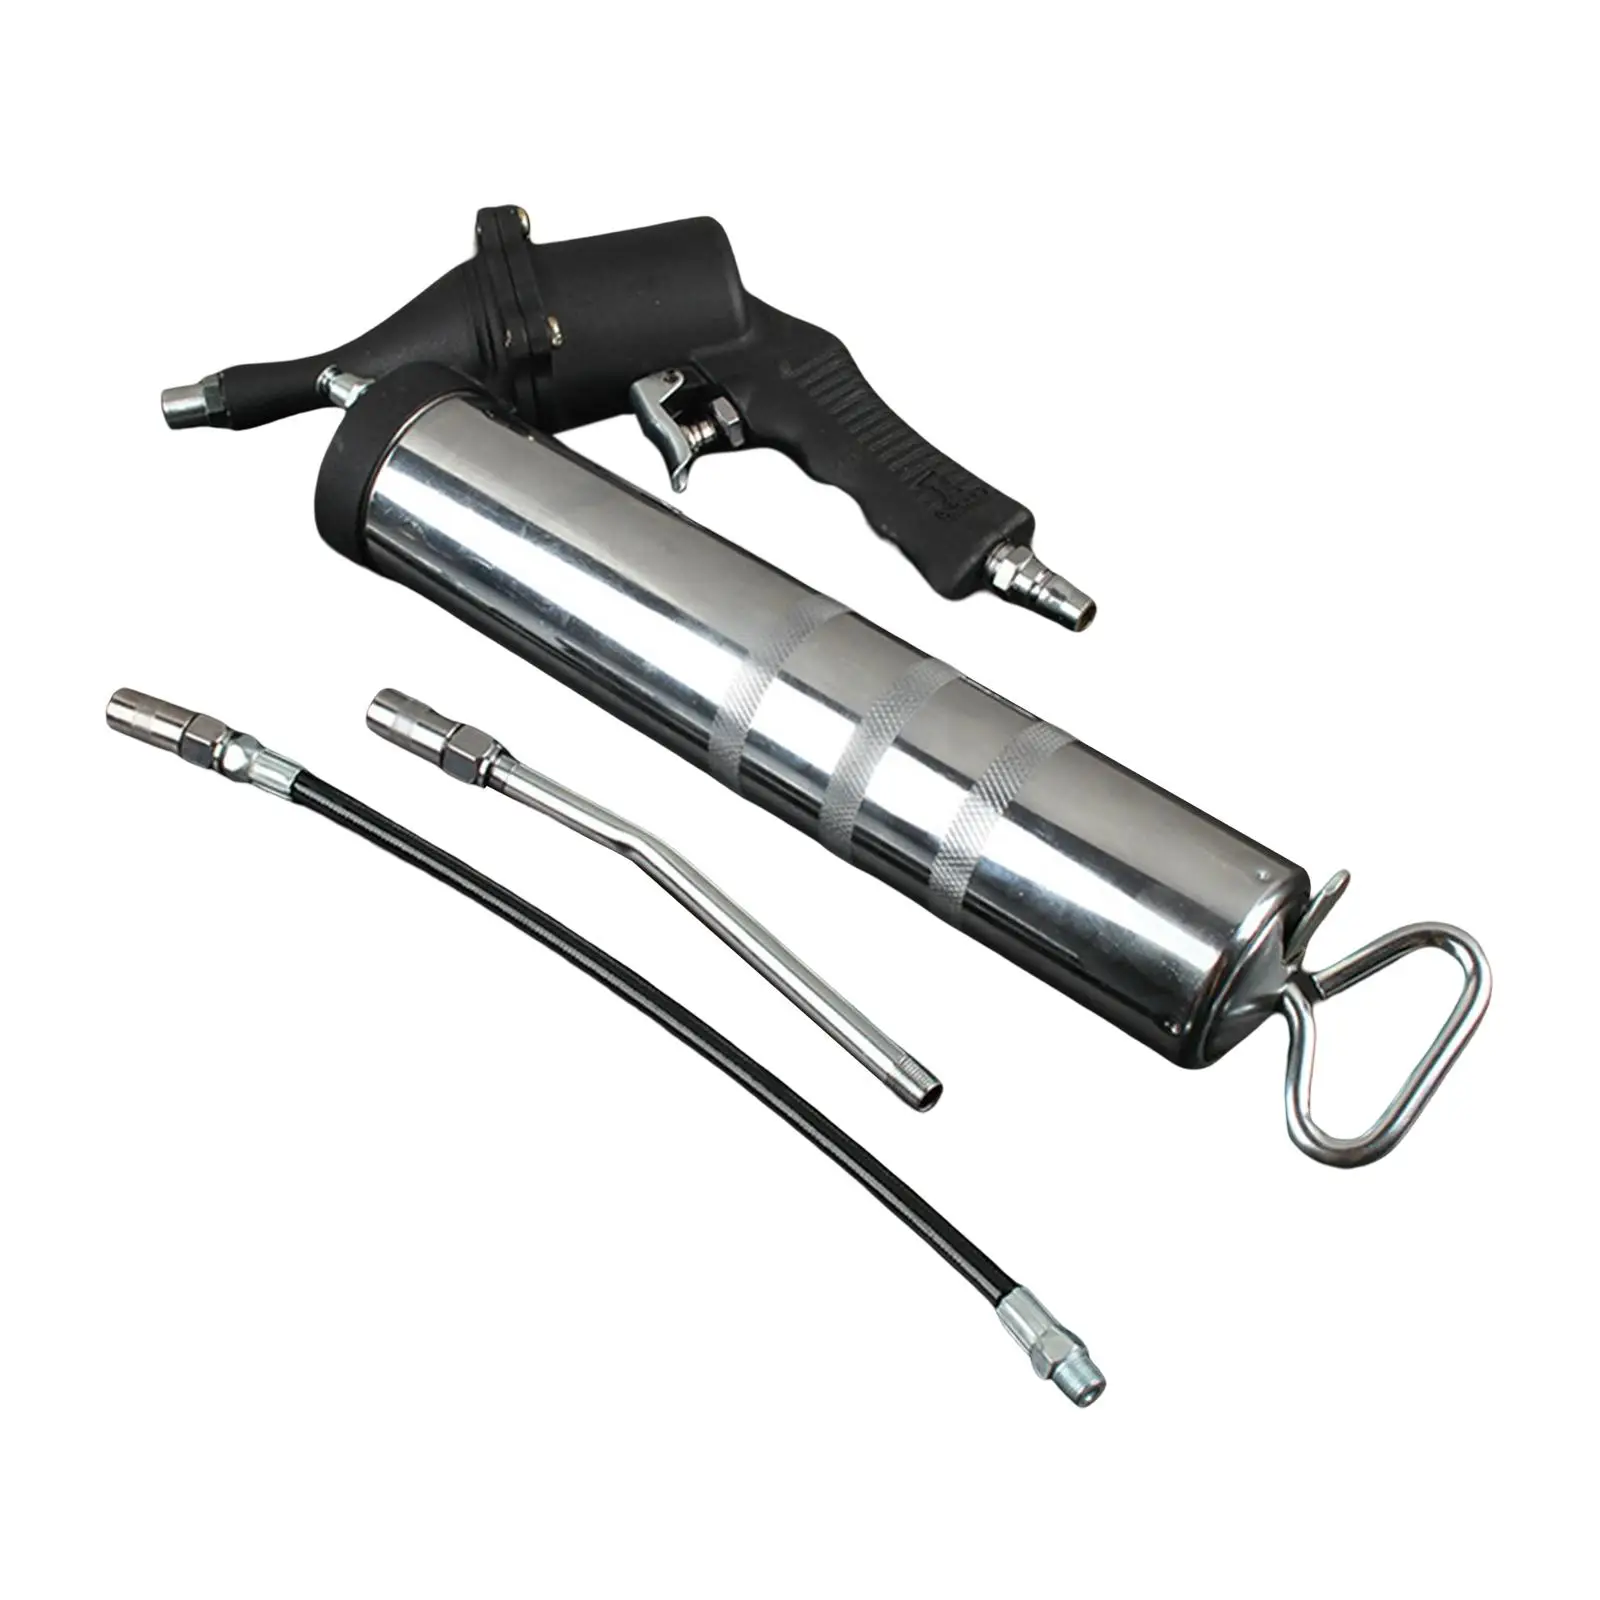 Steel Air Pneumatic Grease Guns Lubrication Tools Hand Operated 400cc Flexible